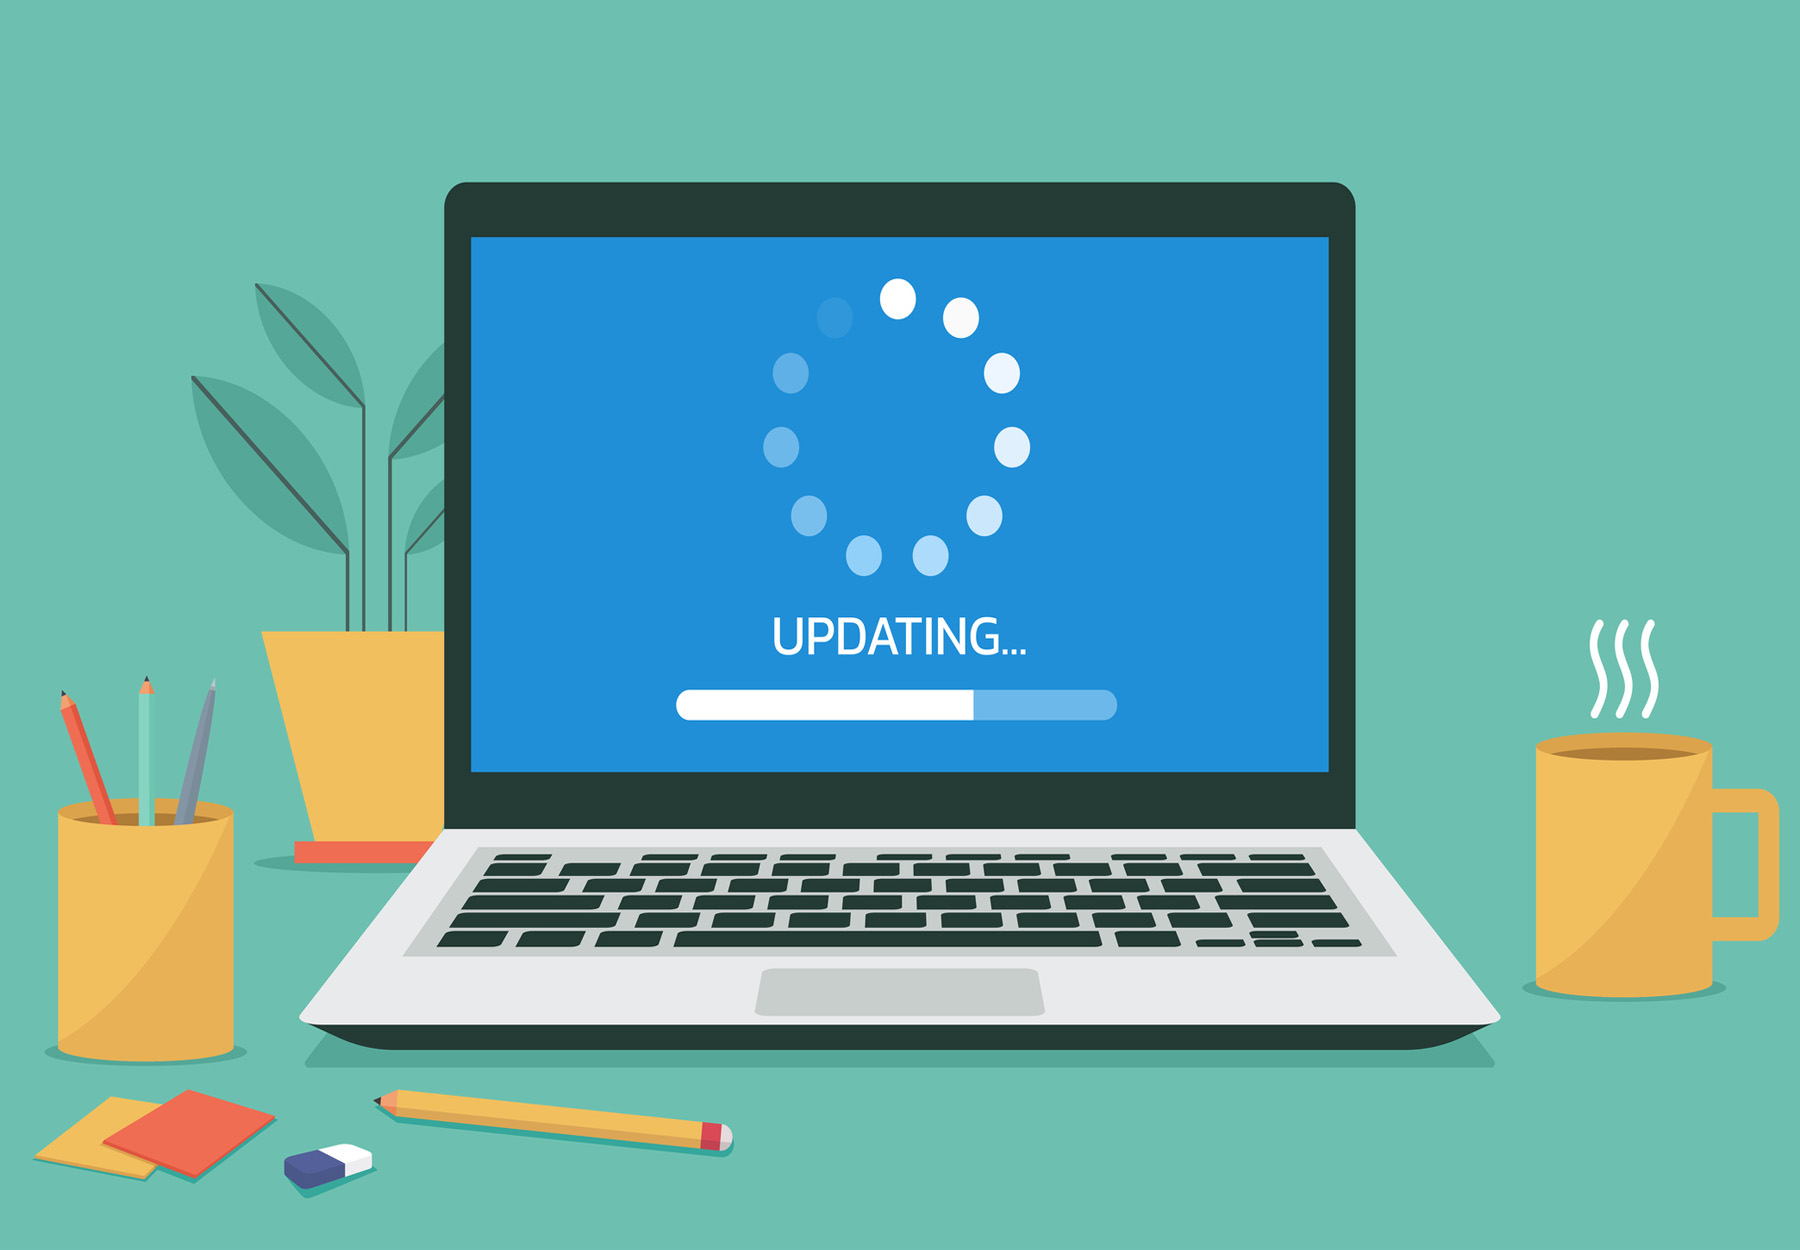 Illustration of laptop with a blue screen that reads "Updating" on it